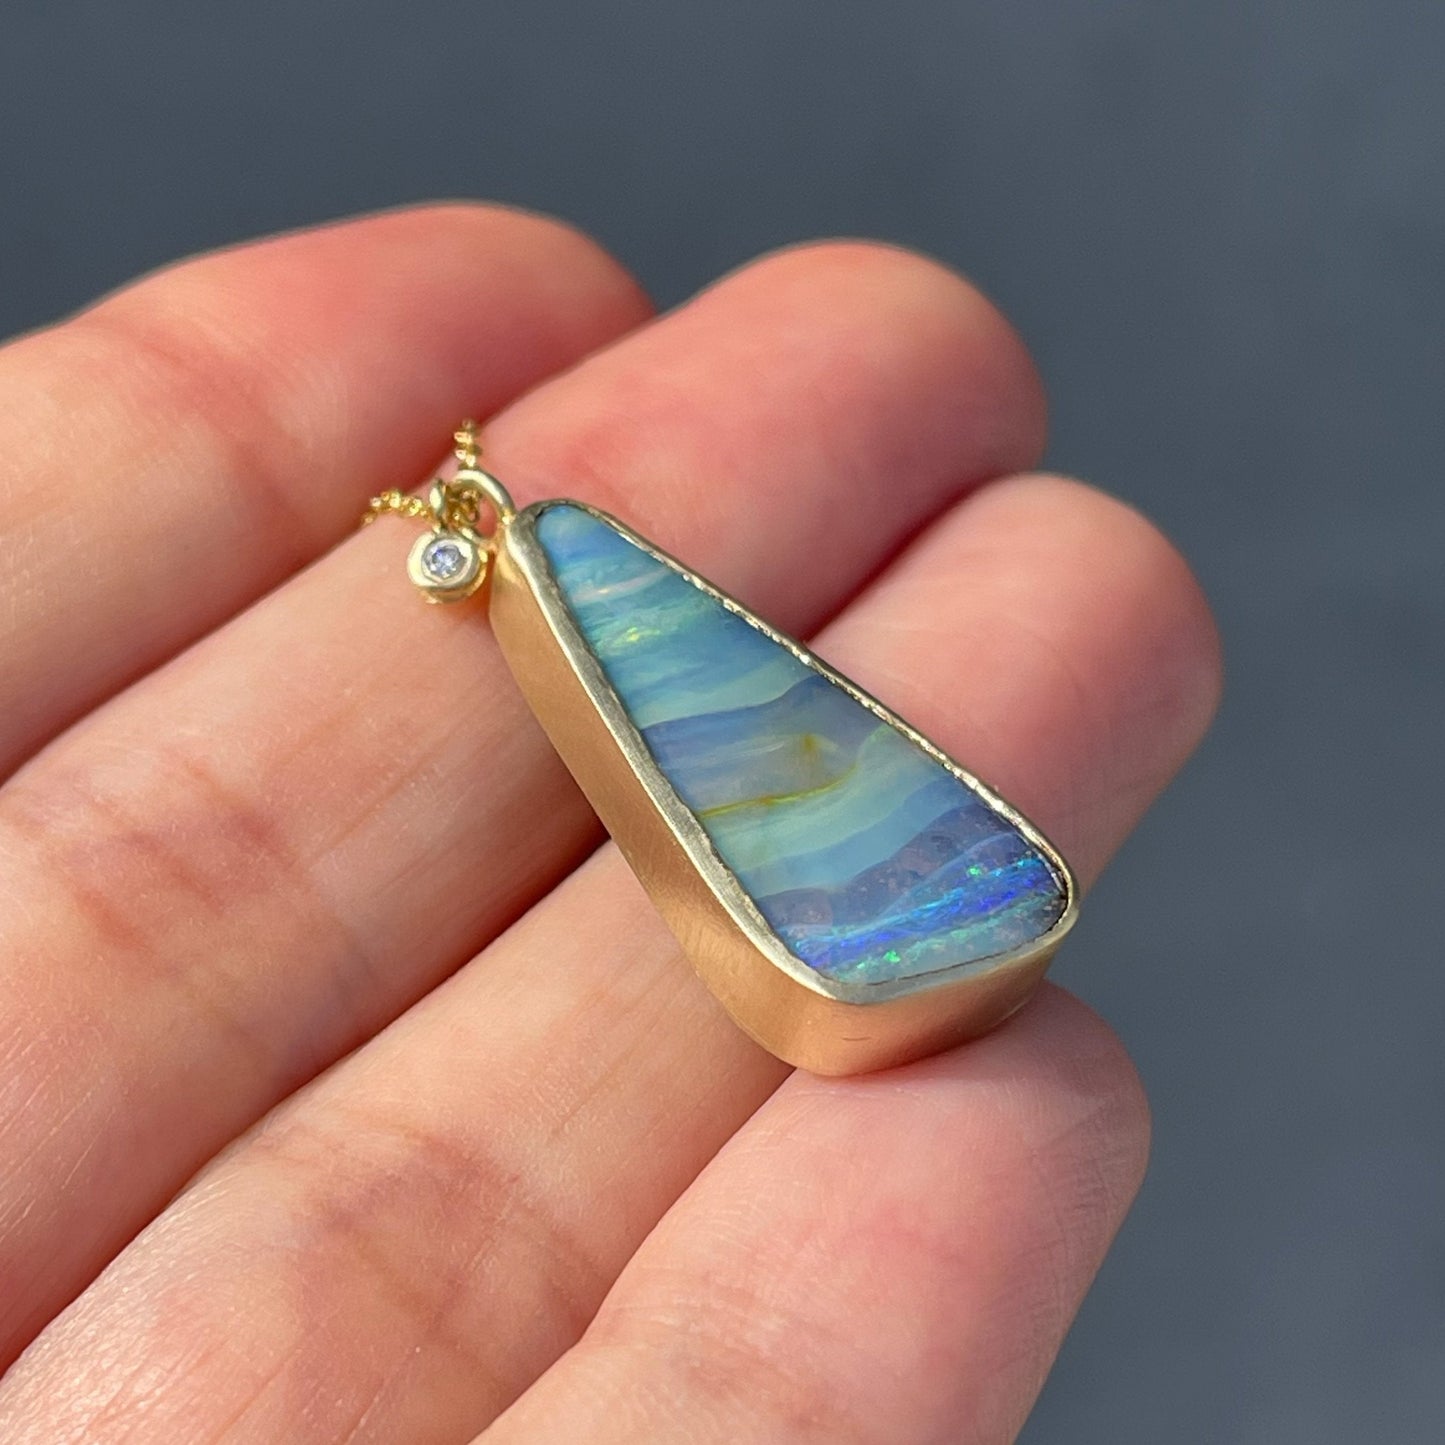 Matte gold and blue opal necklace by NIXIN Jewelry shown at angle